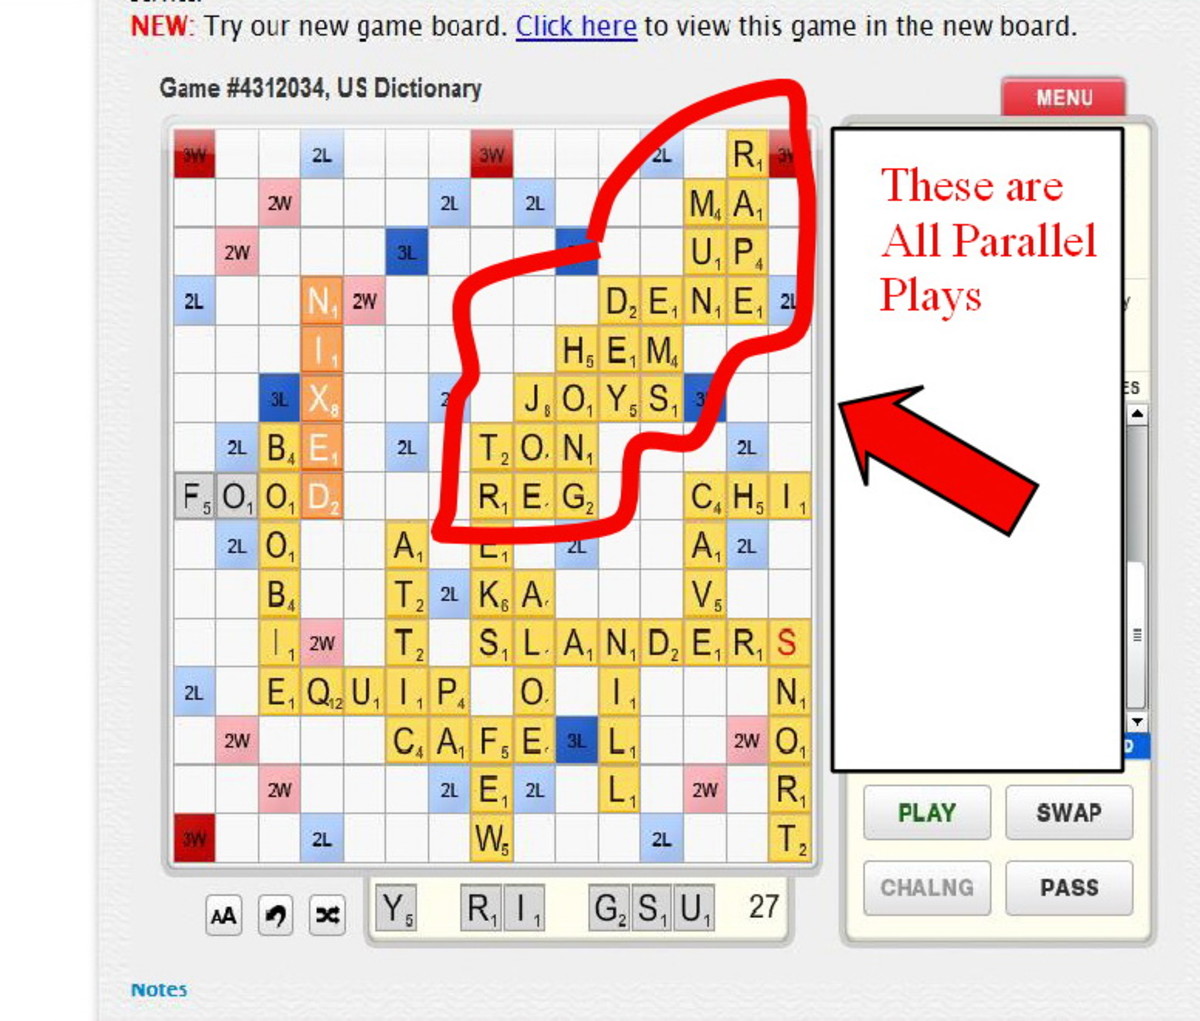 Examples of parallel plays in Scrabble.